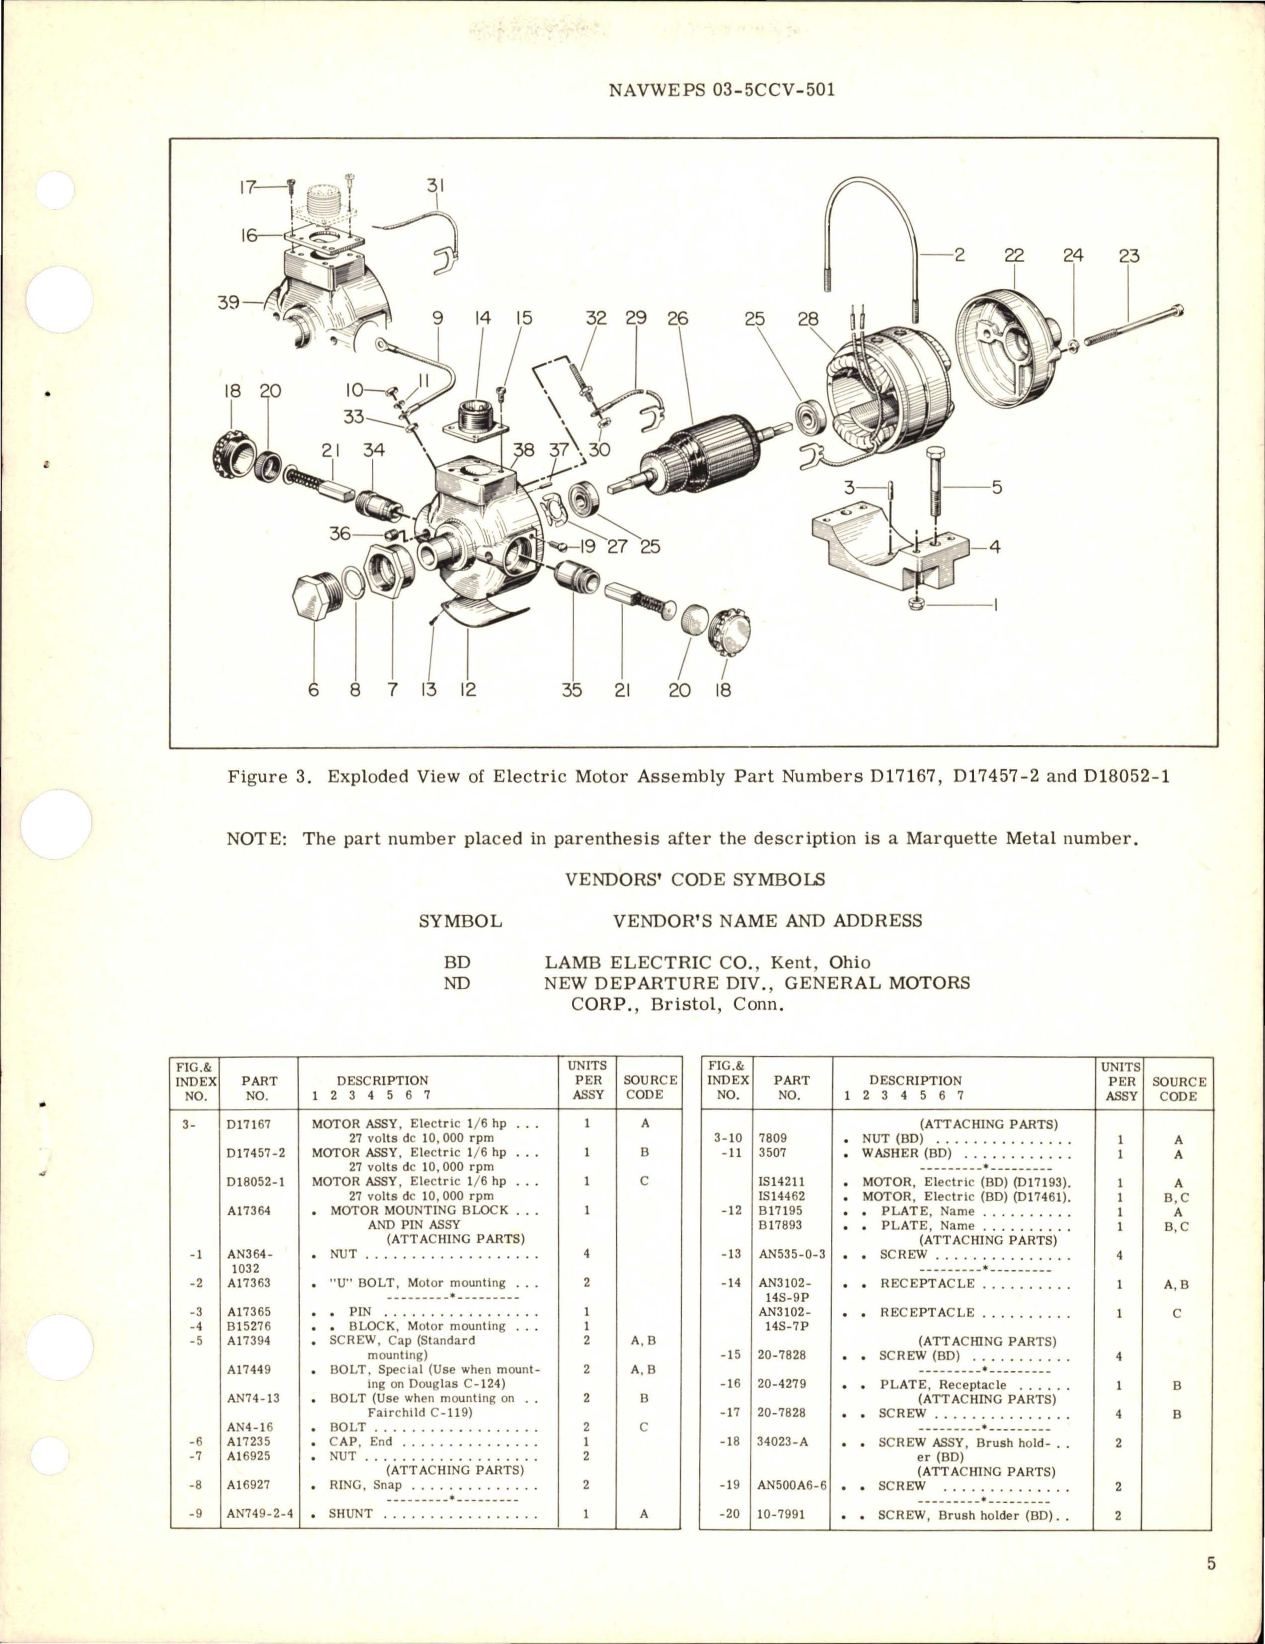 Sample page 5 from AirCorps Library document: Overhaul Instructions with Parts Breakdown for Electric Motor Assembly - Parts D17167, D17457-2, and D18052-1